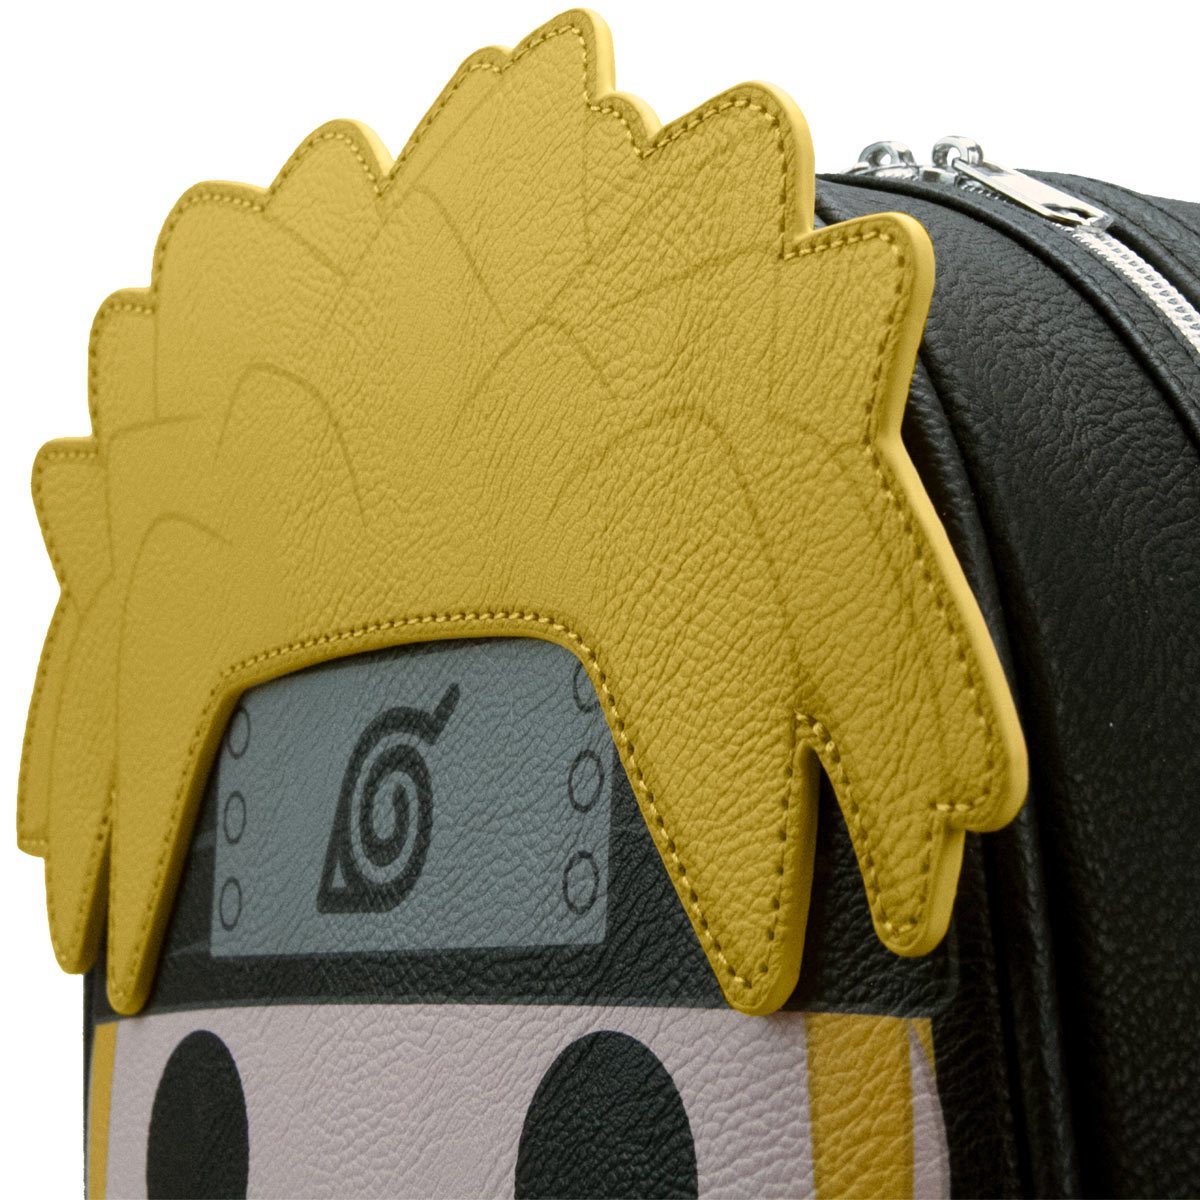 LIMITED EDITION: Naruto Shippuden Backpack